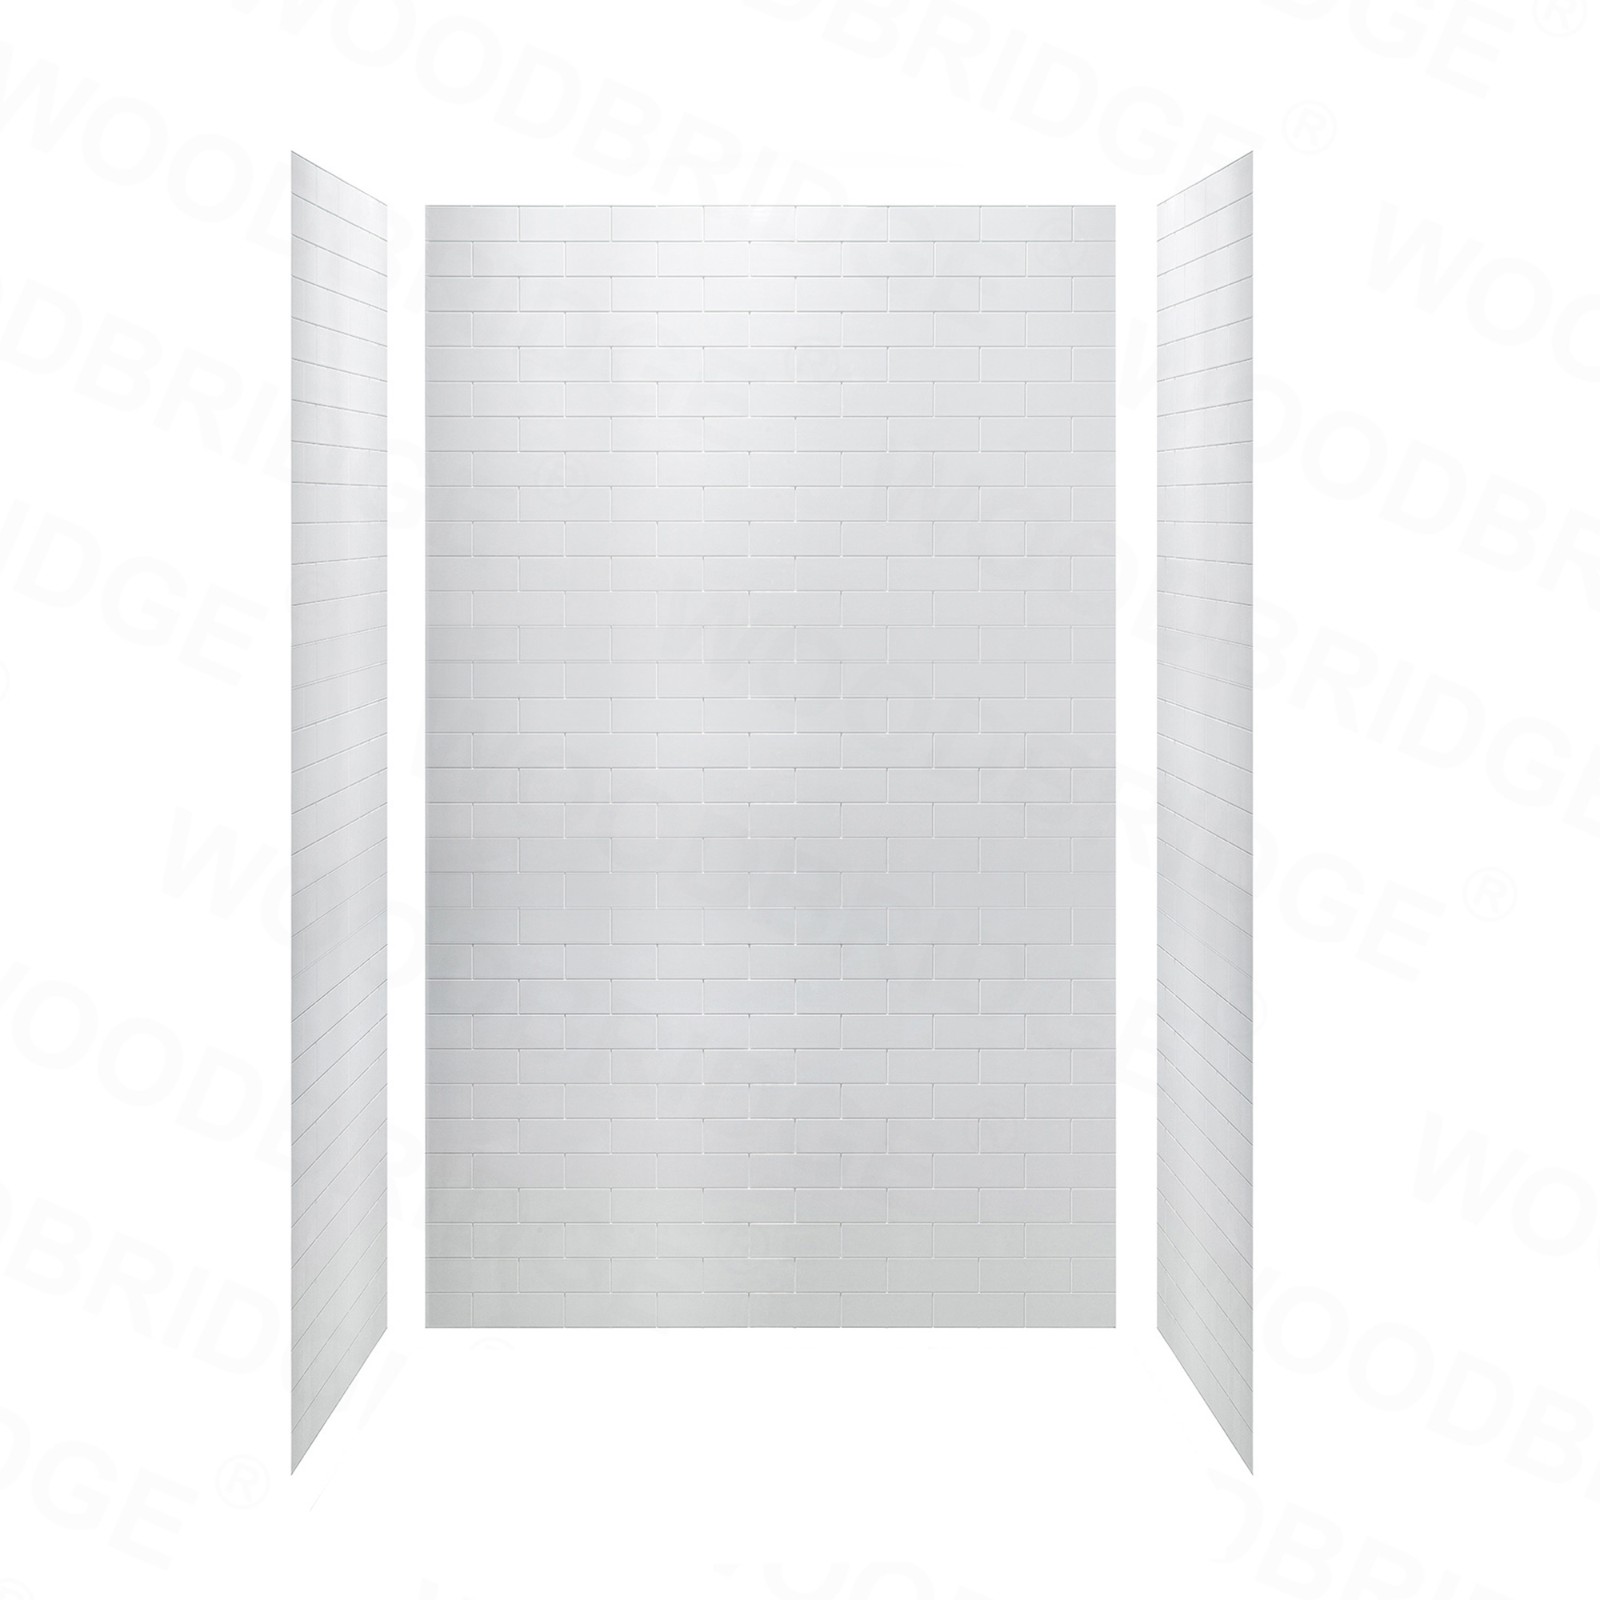  WOODBRIDGE SWP603296-1-SU-H Solid Surface 3-Panel Shower Wall Kit, 32-in L x 60-in W x 96-in H, Staggered Brick Pattern, High Gloss, White_8484